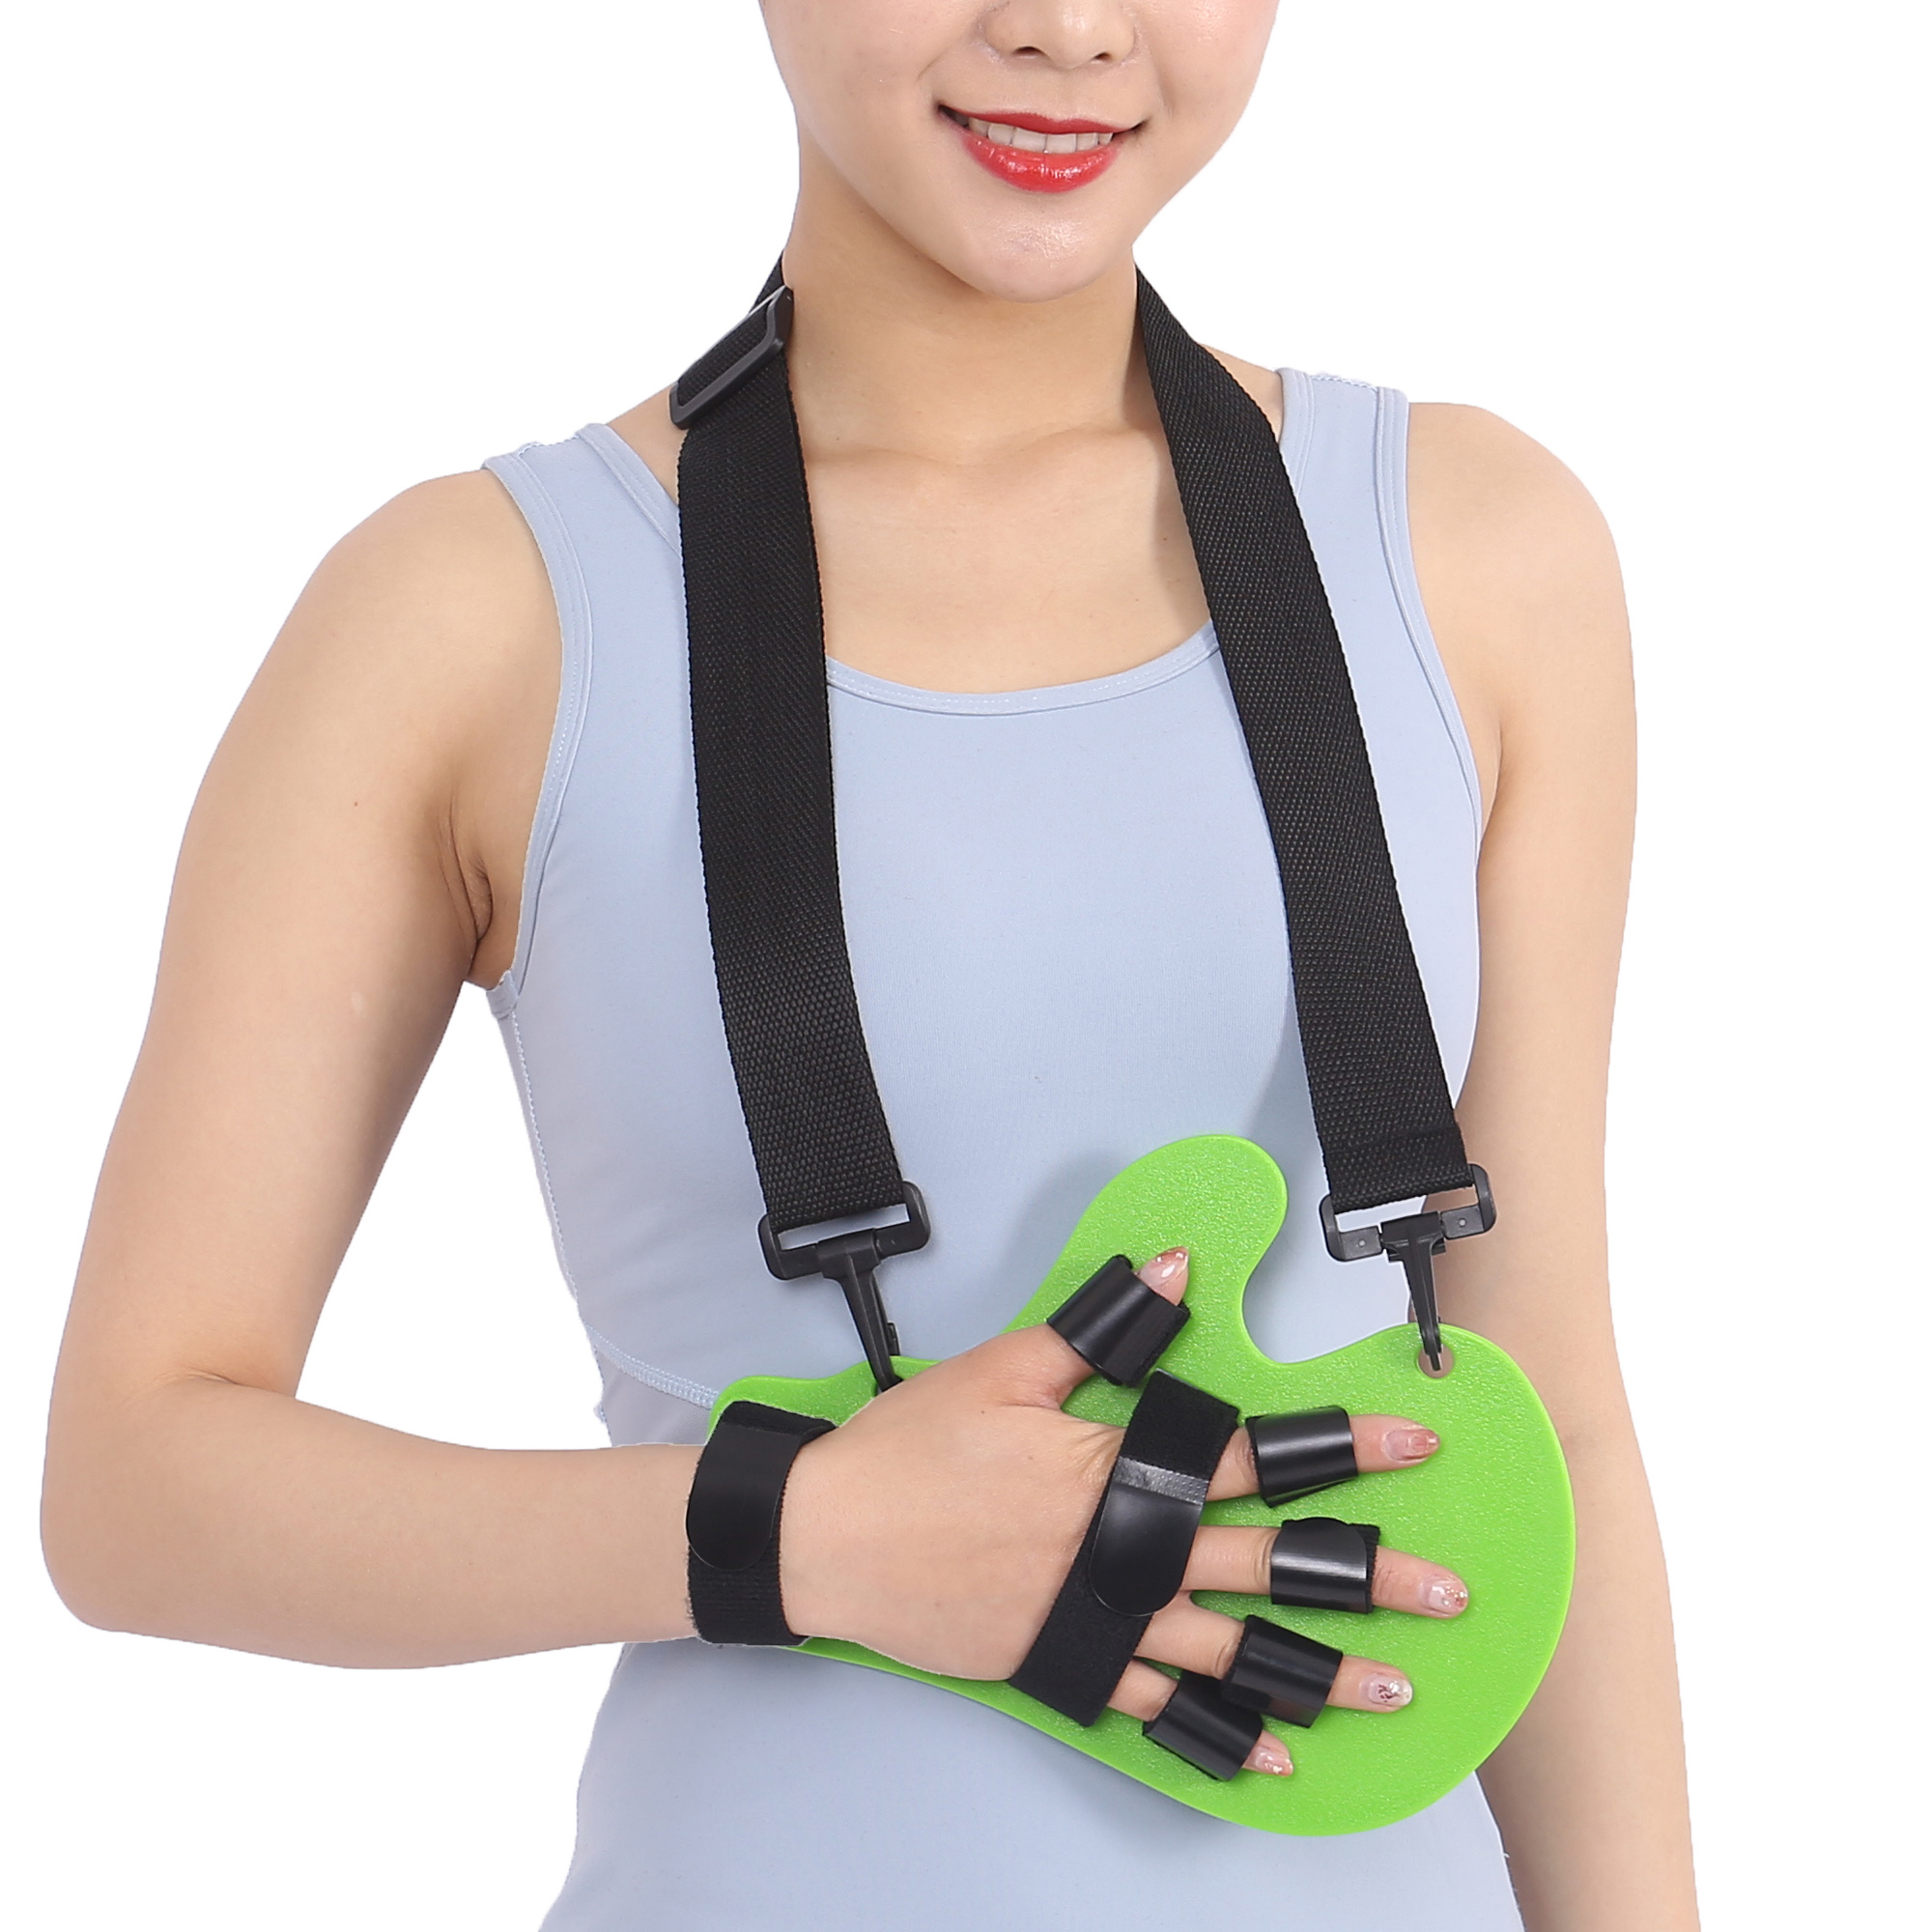 Relieve back pain and improve posture with The Guardner Belt | KHON2